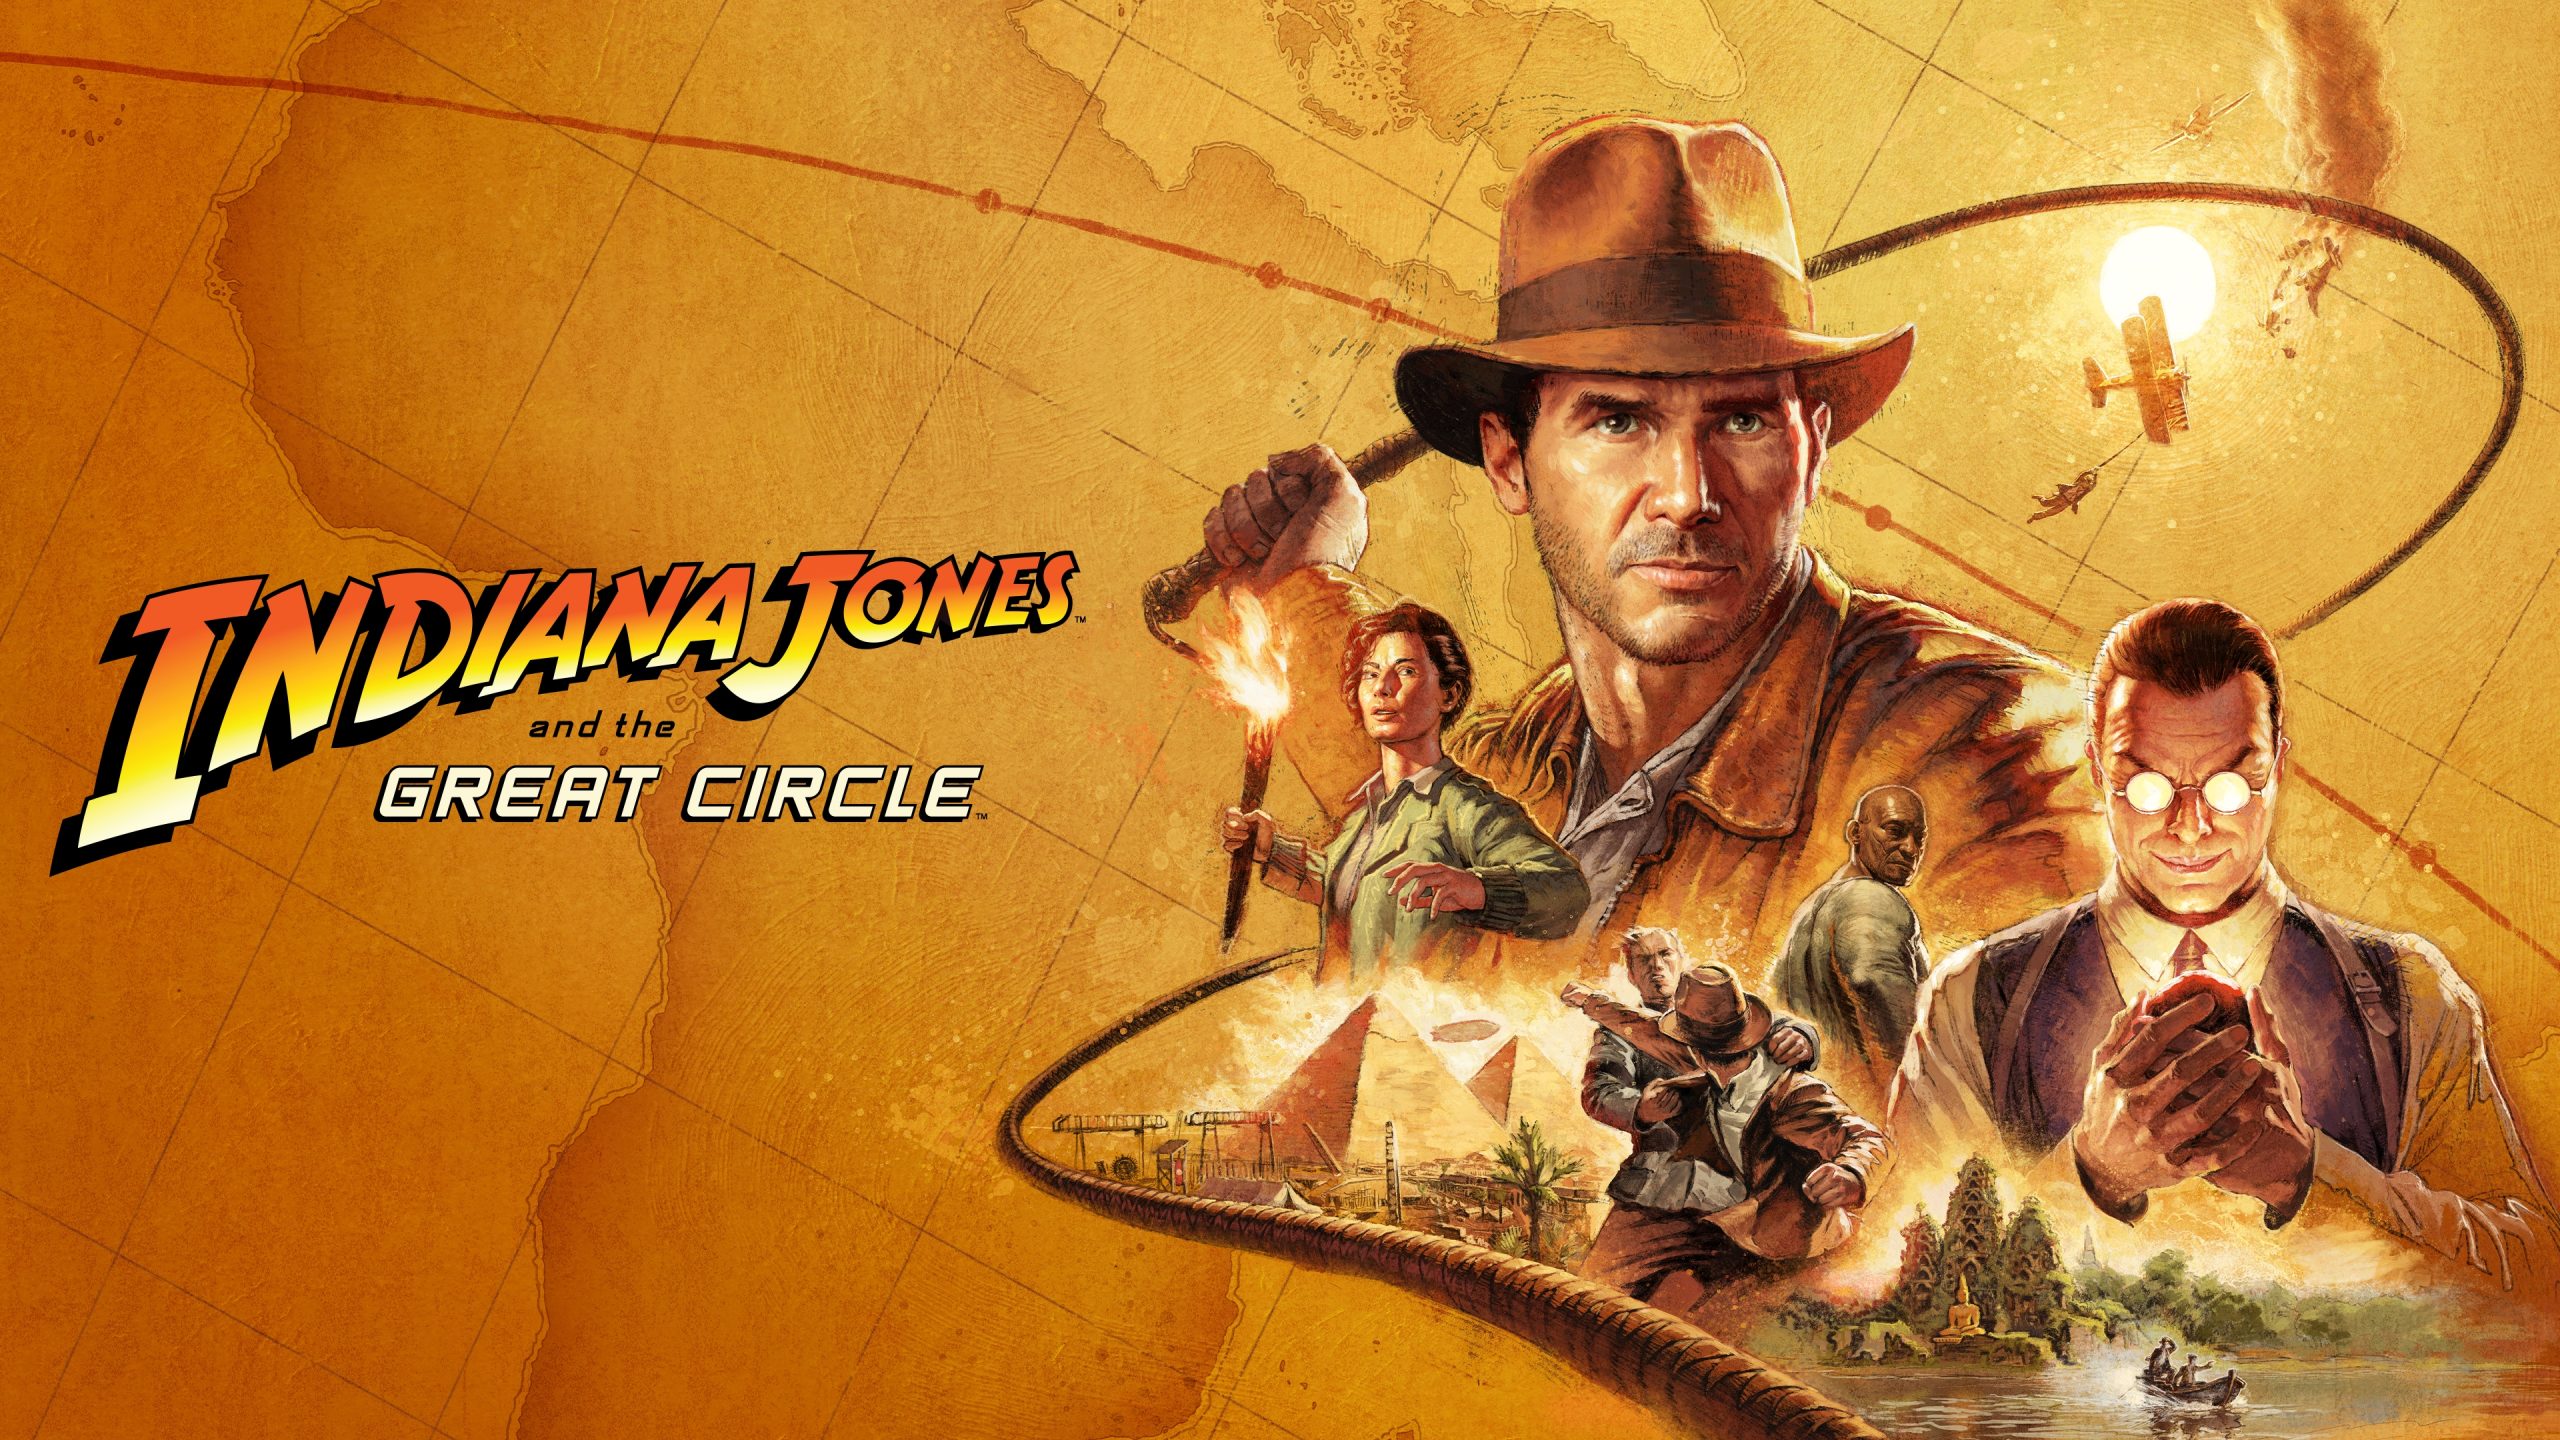 Indiana Jones & the Great Circle on PS5 in 2025